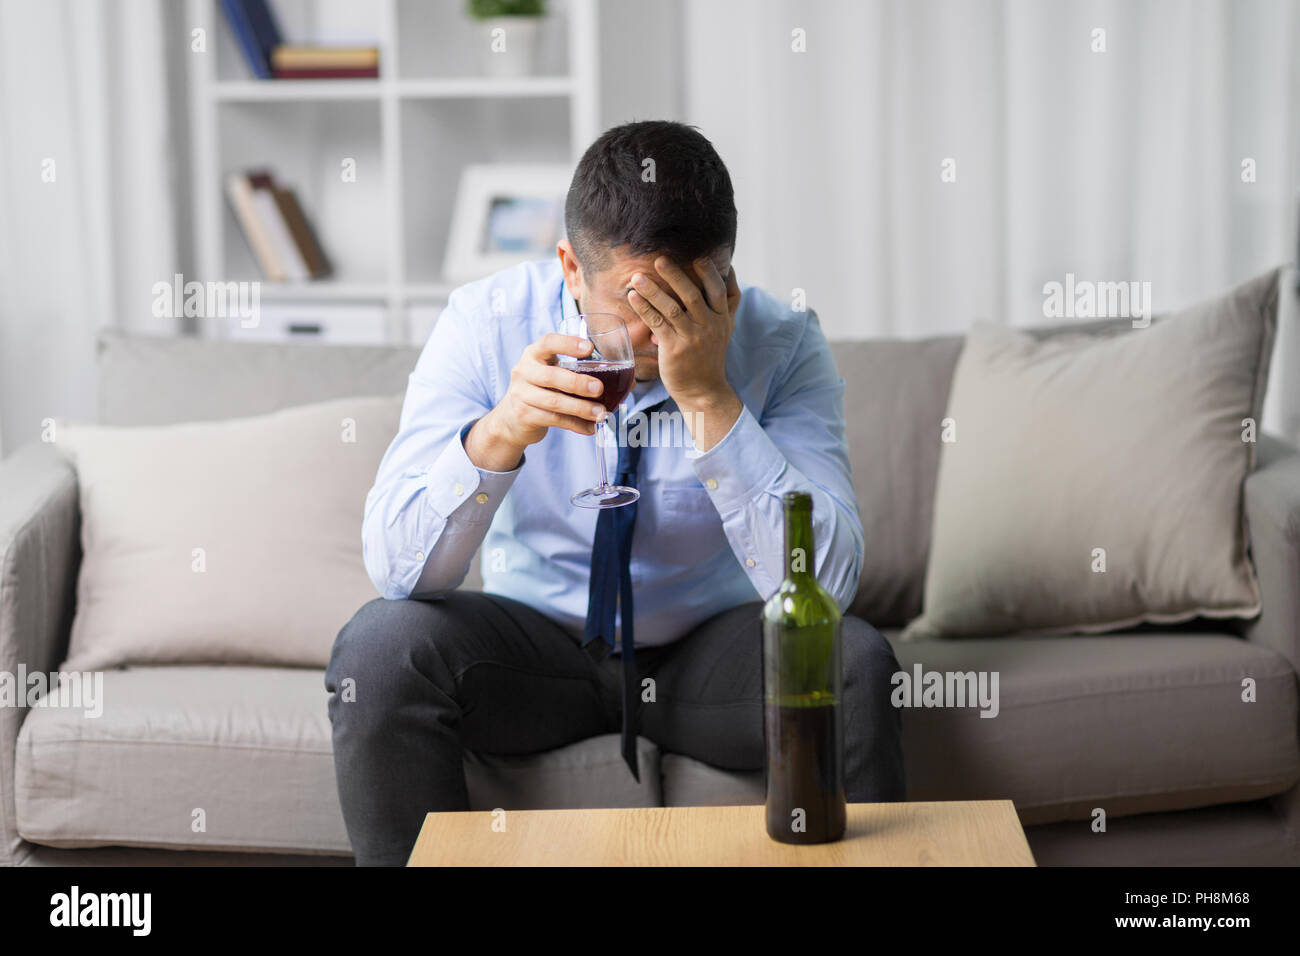 alcoholic drinking red wine at home Stock Photo